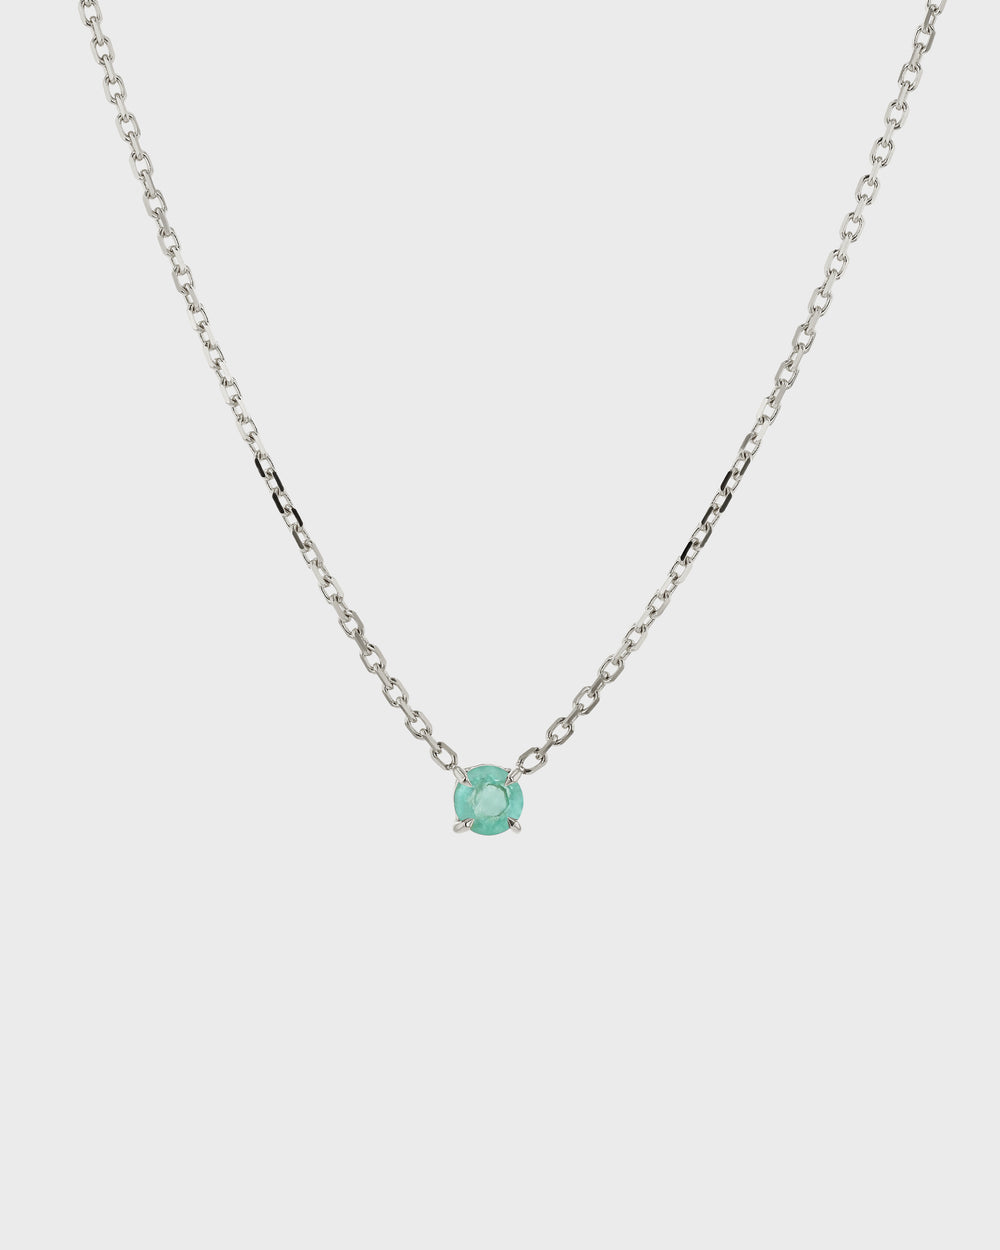 The Emerald Birthstone Necklace